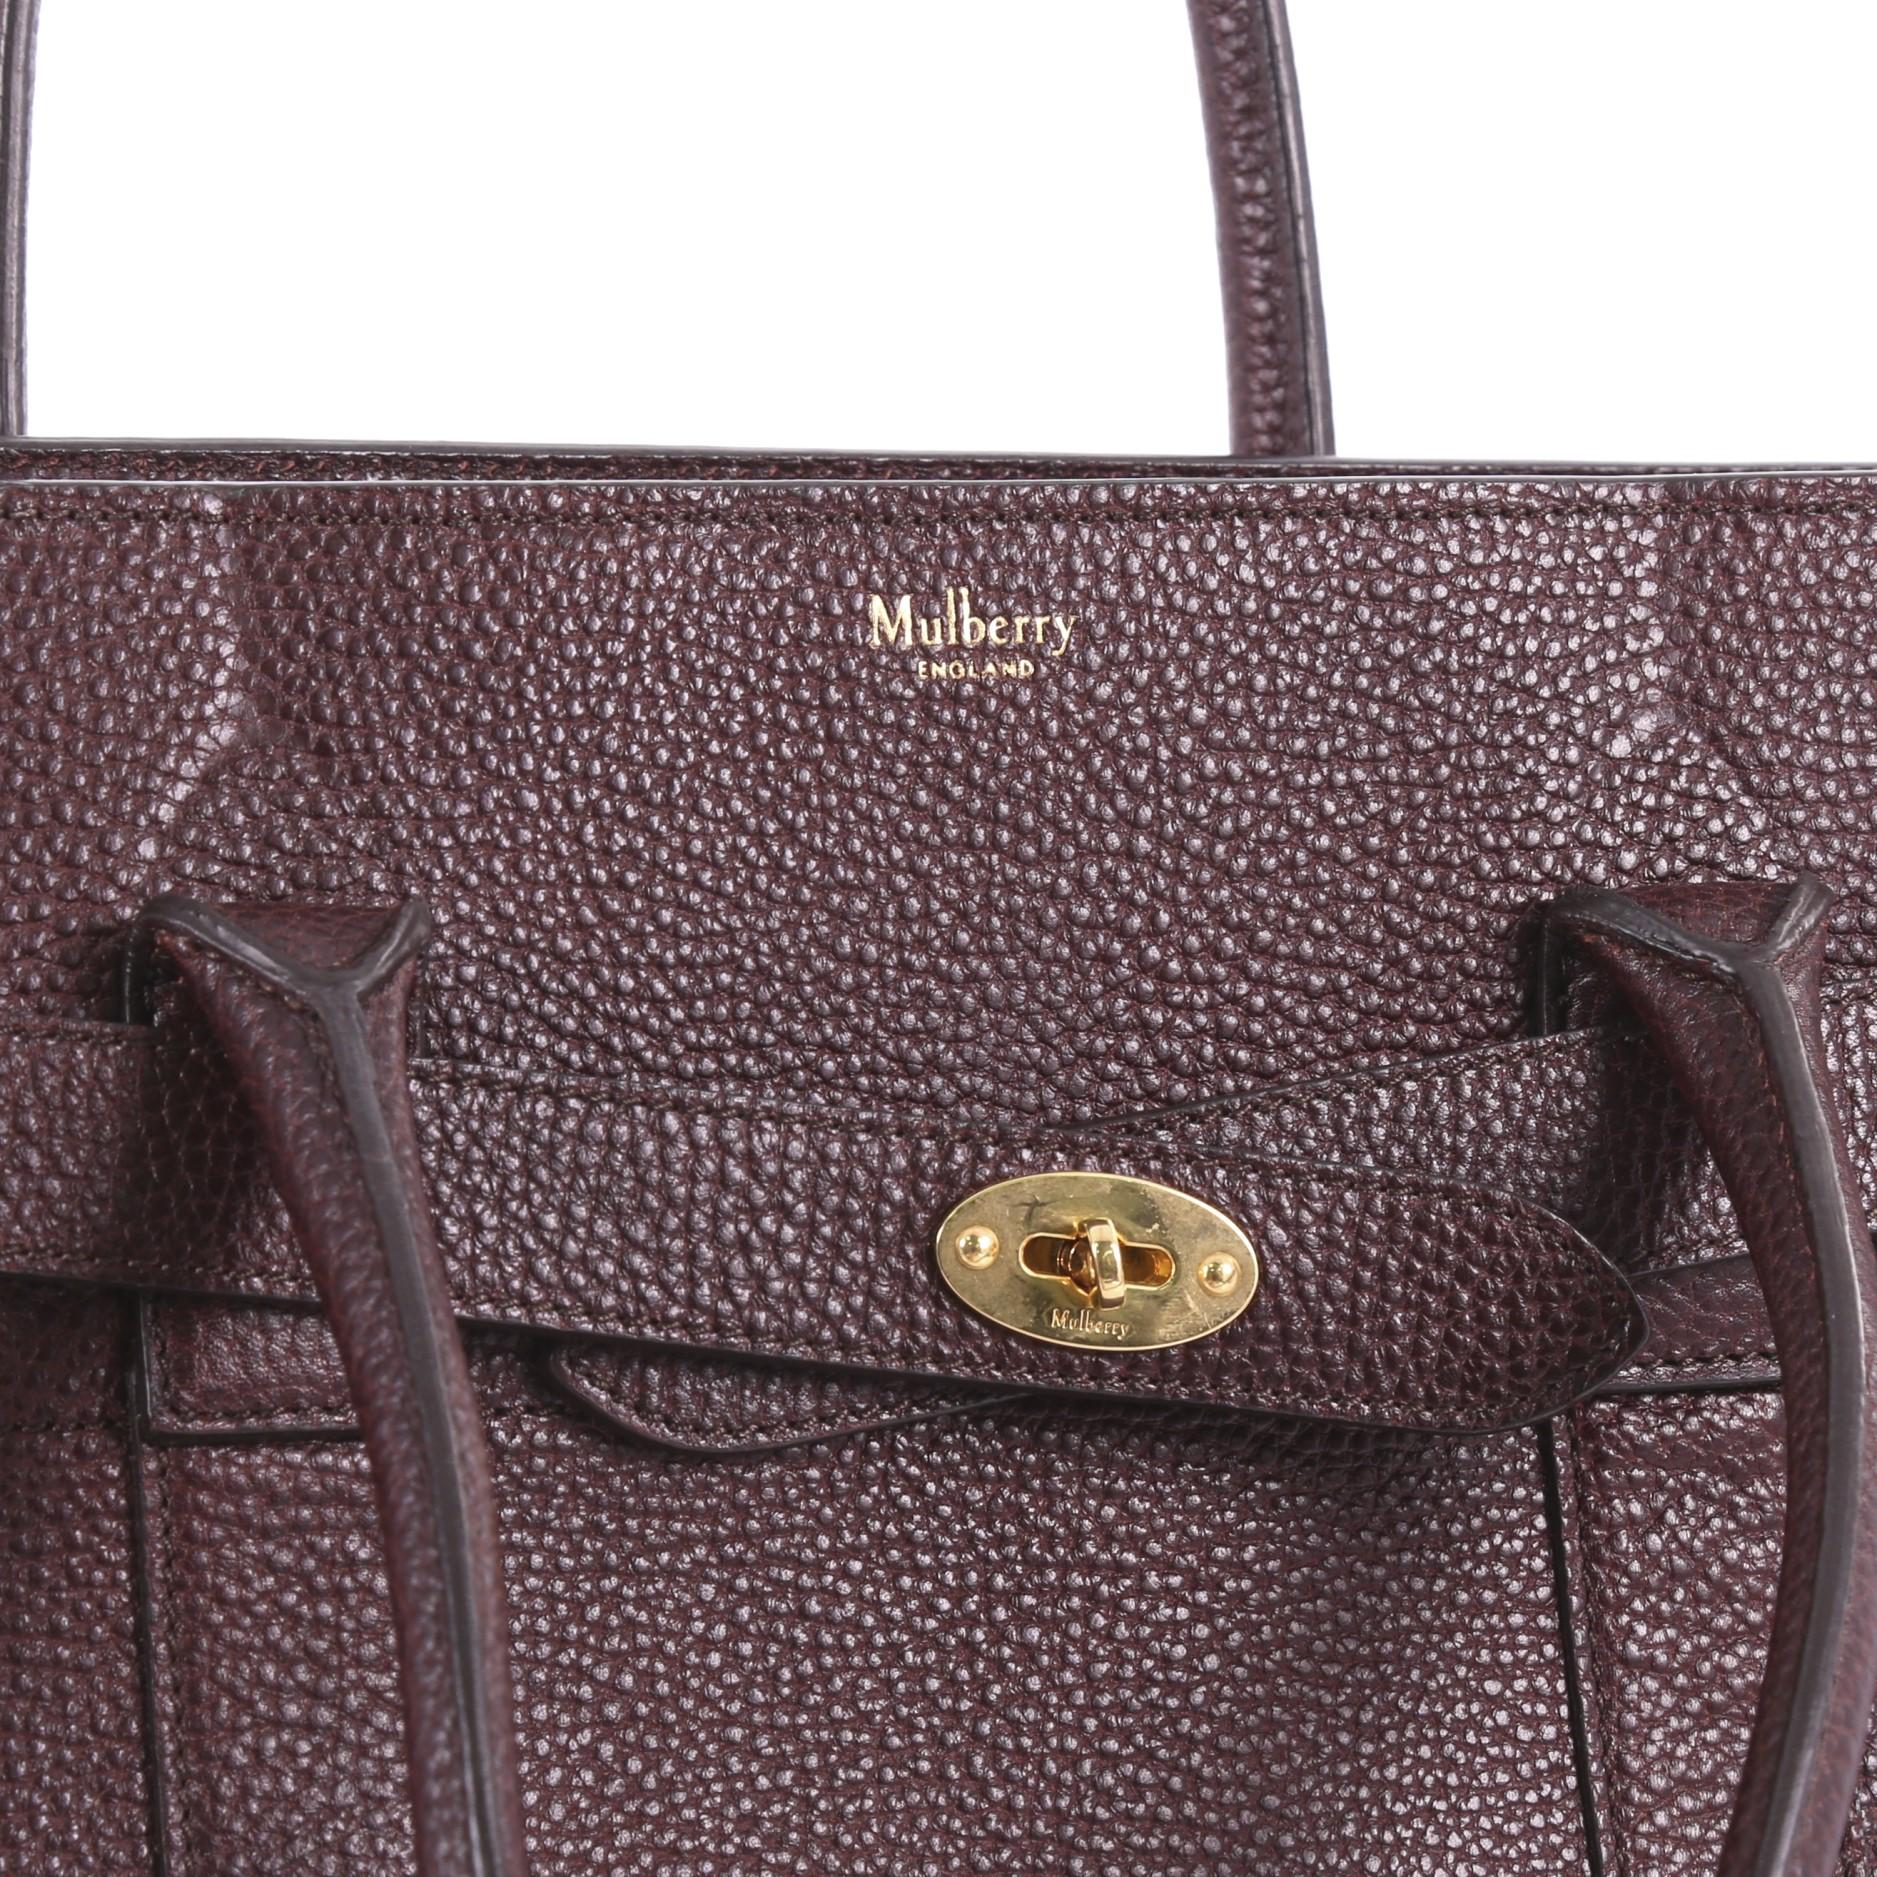  Mulberry Bayswater Zipped Tote Leather Medium 3